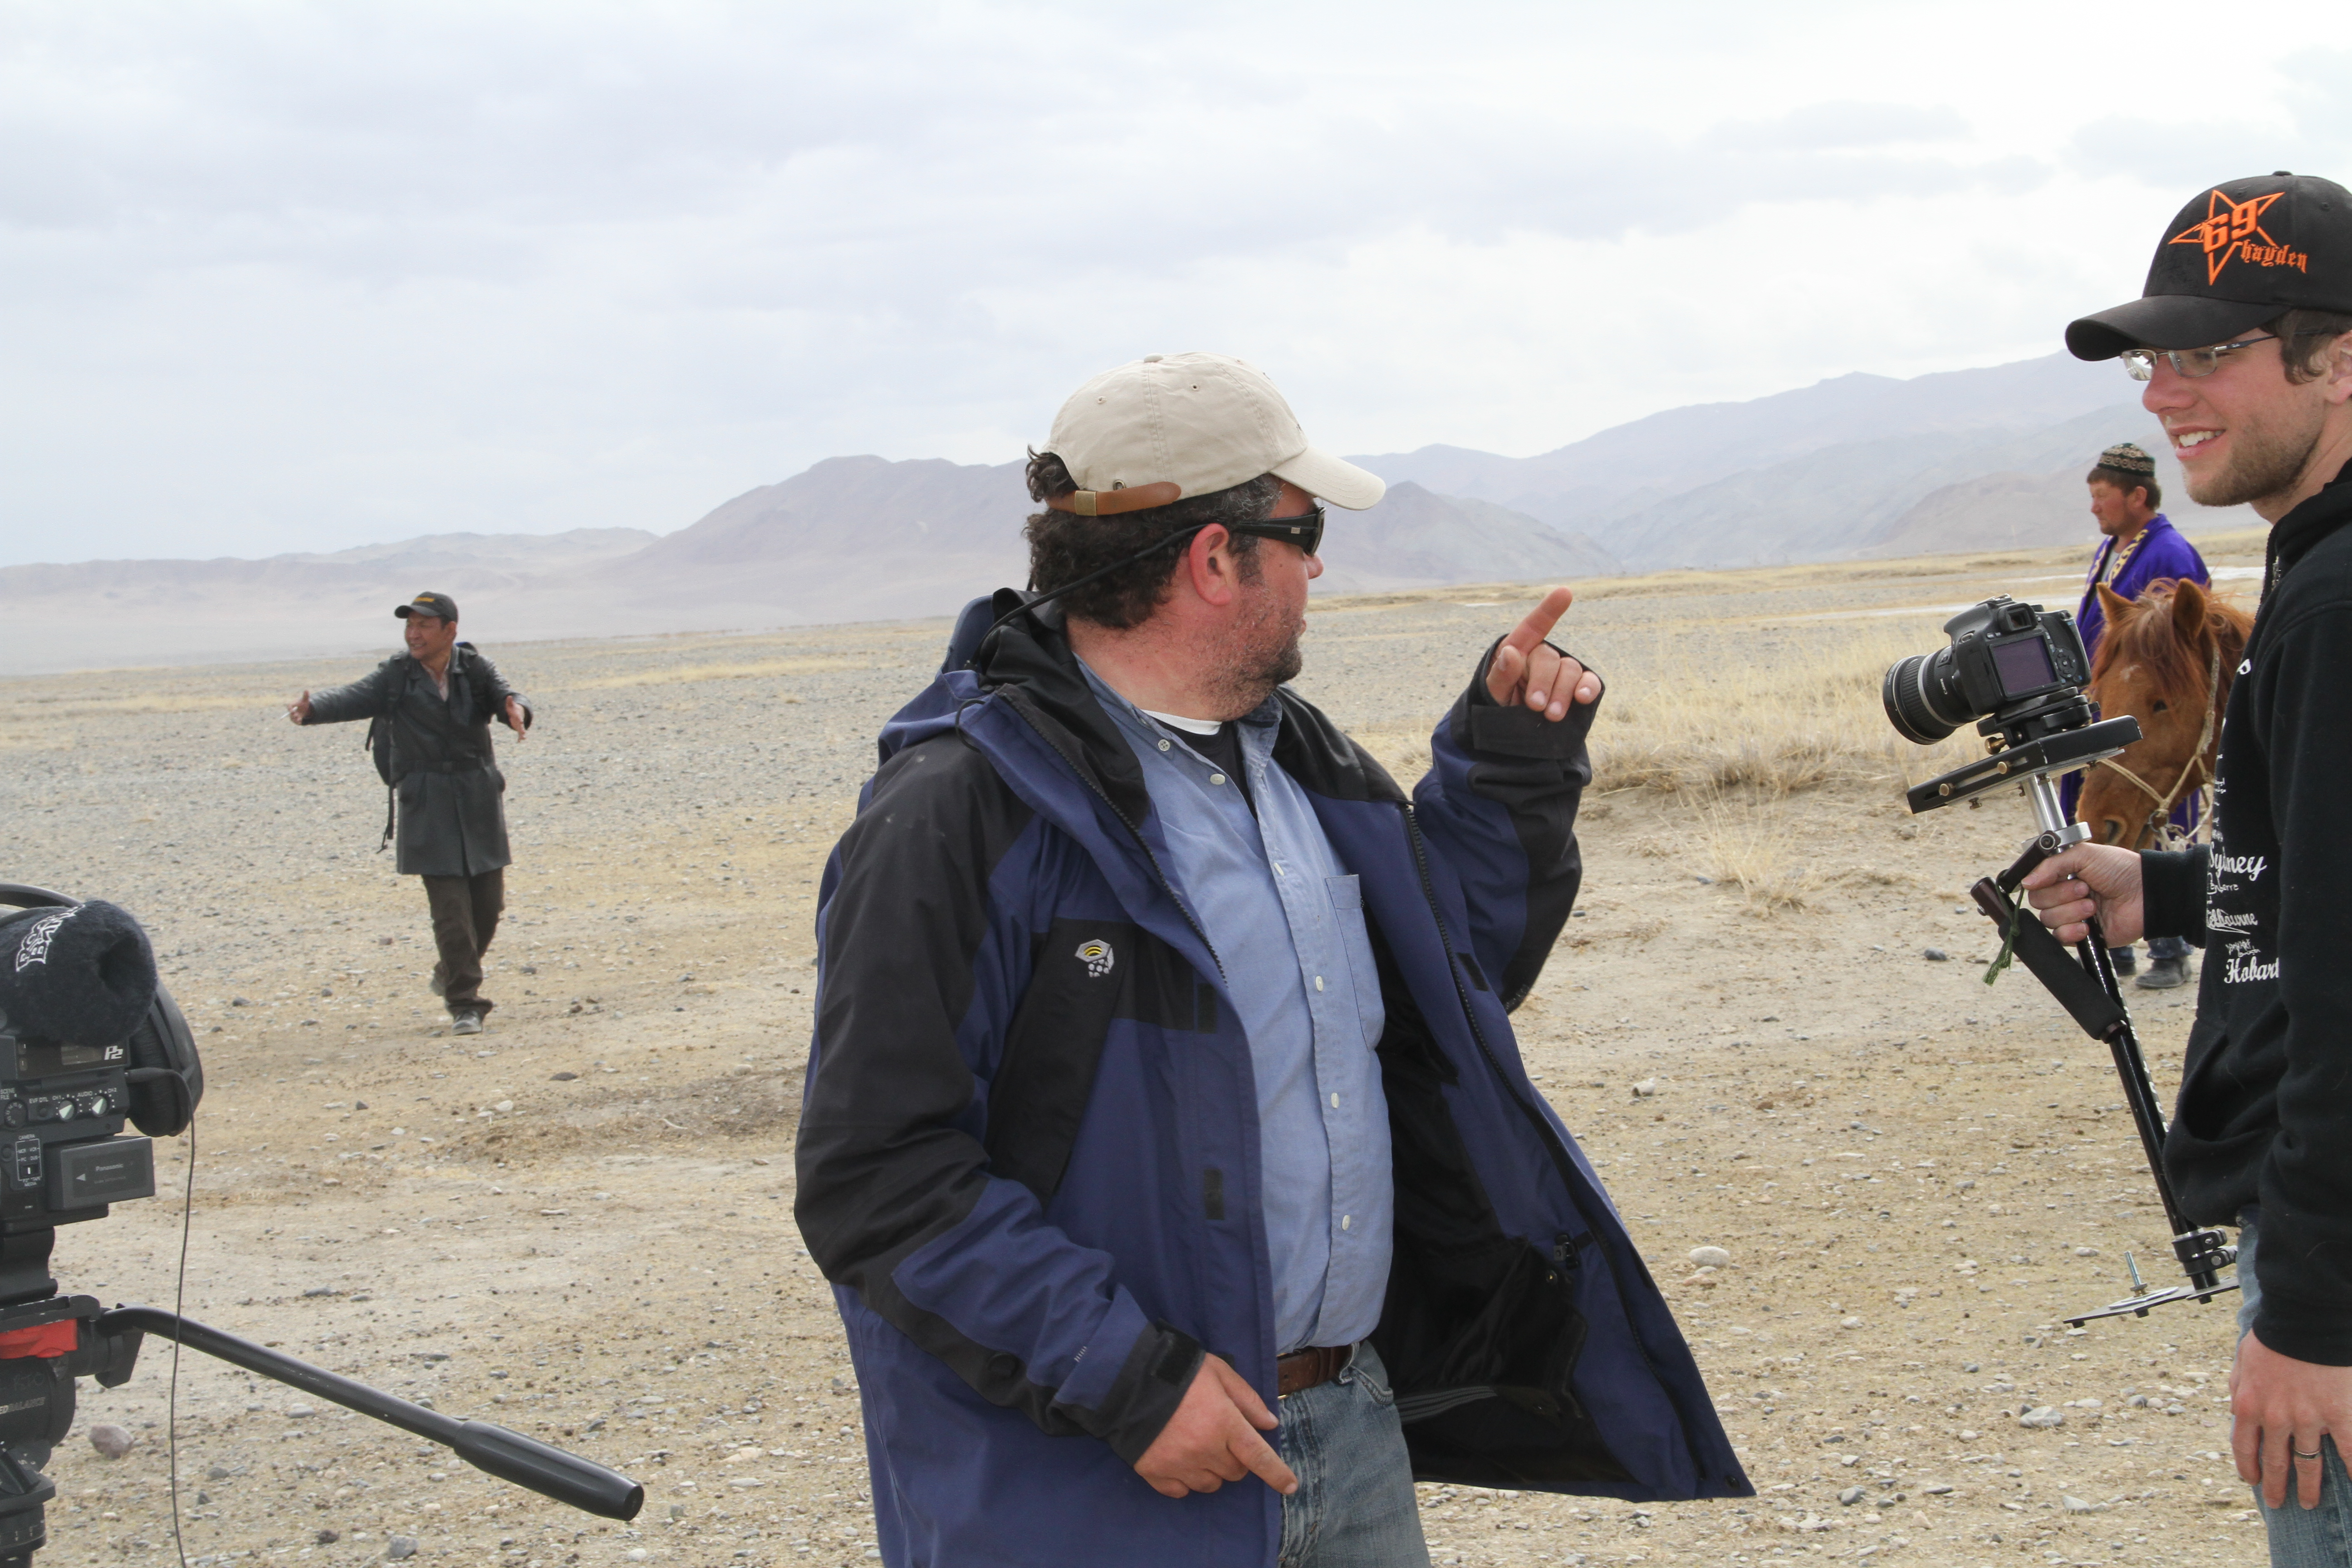 Director of Photograhy, Fernando Del Rio on the set in Mongolia